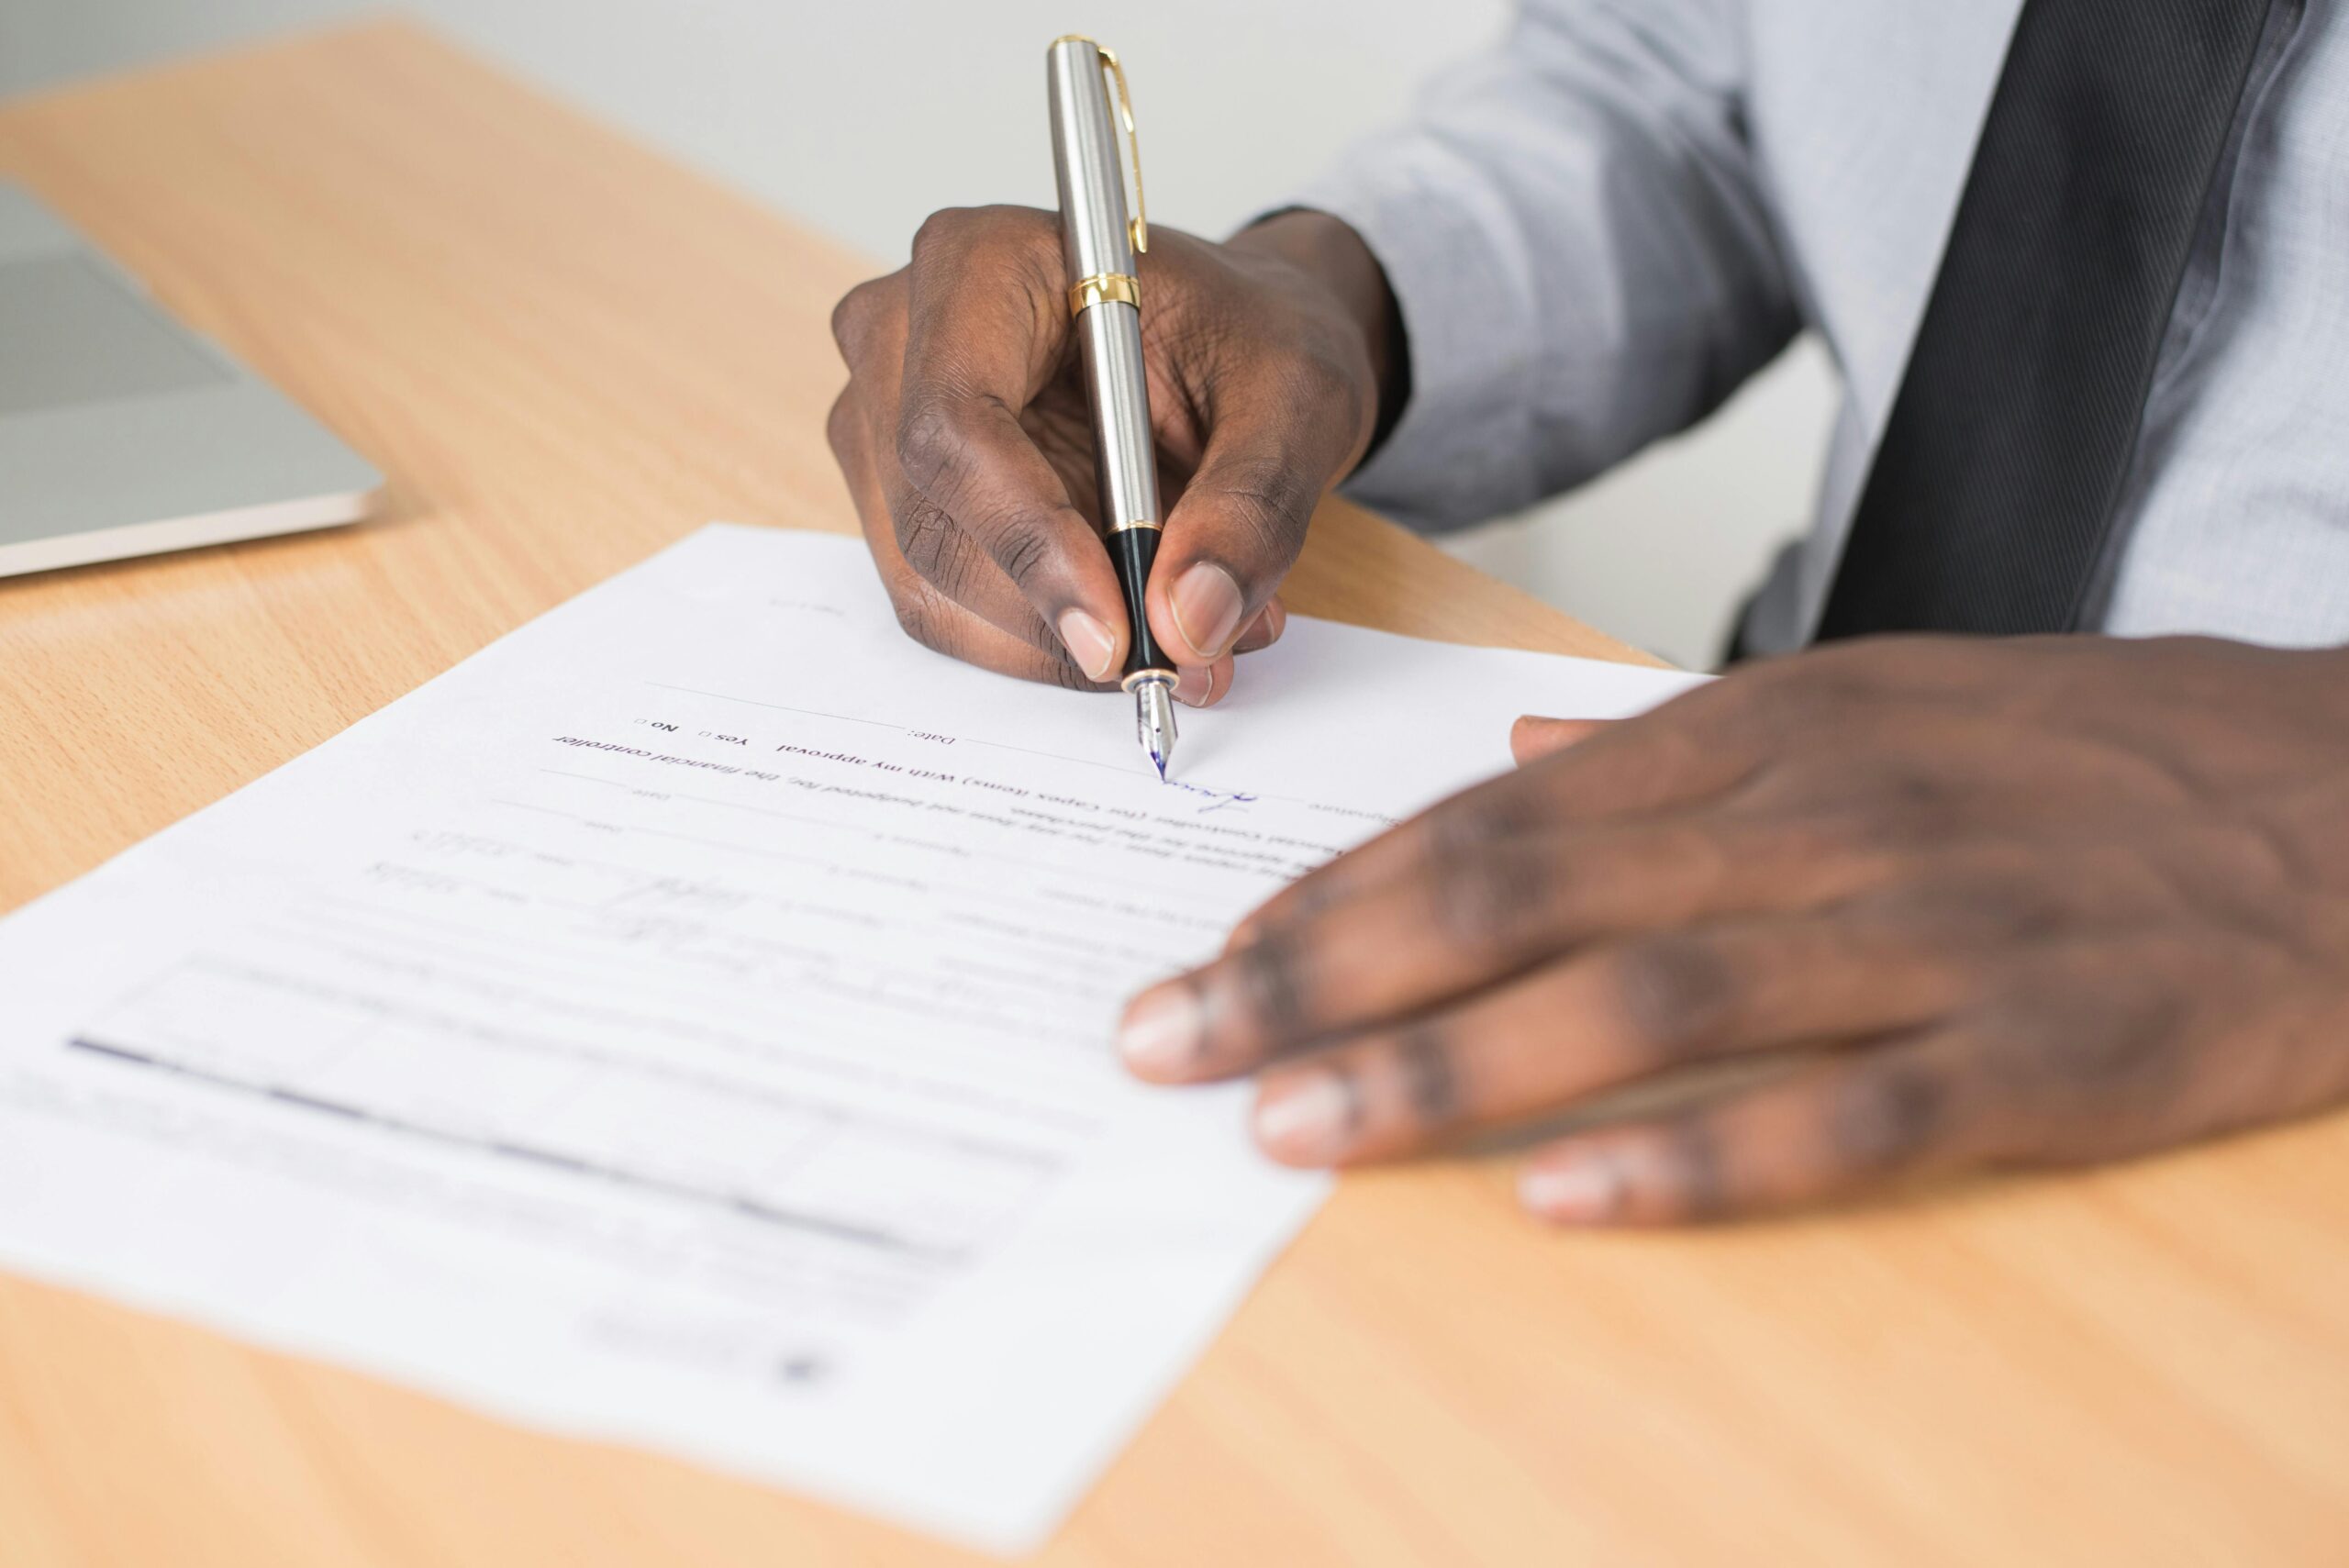 an image of a man signing a bit of paper